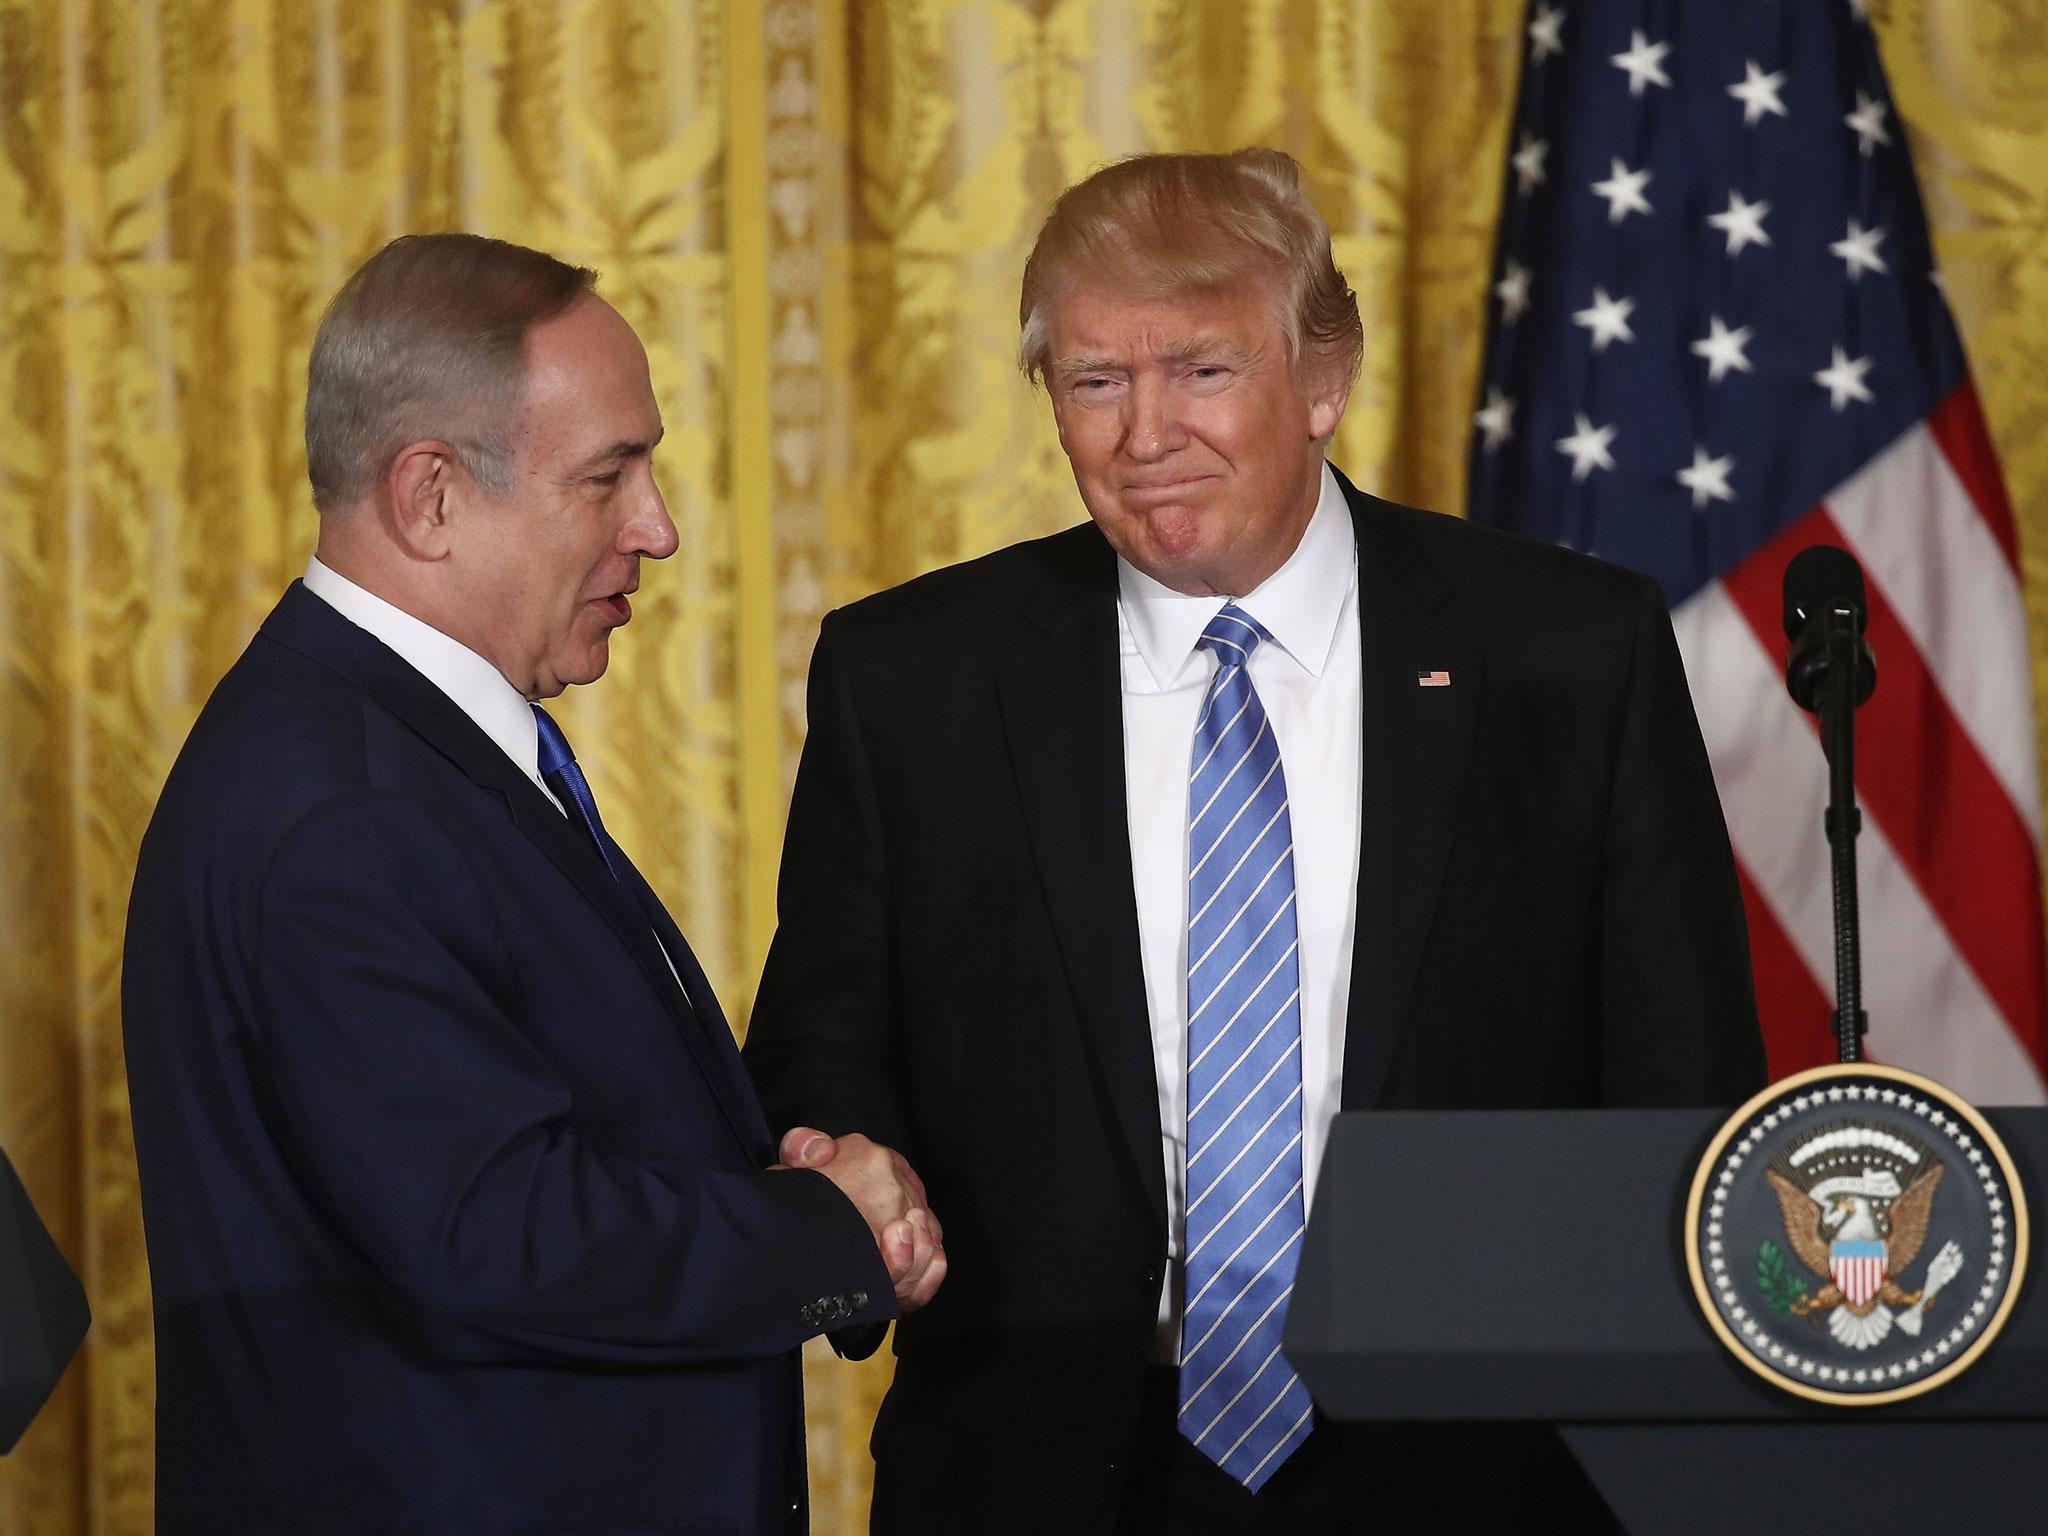 Mr Trump repeated his belief Israel is a "cherished ally" of the US during Mr Netanyahu's visit to Washington DC in February